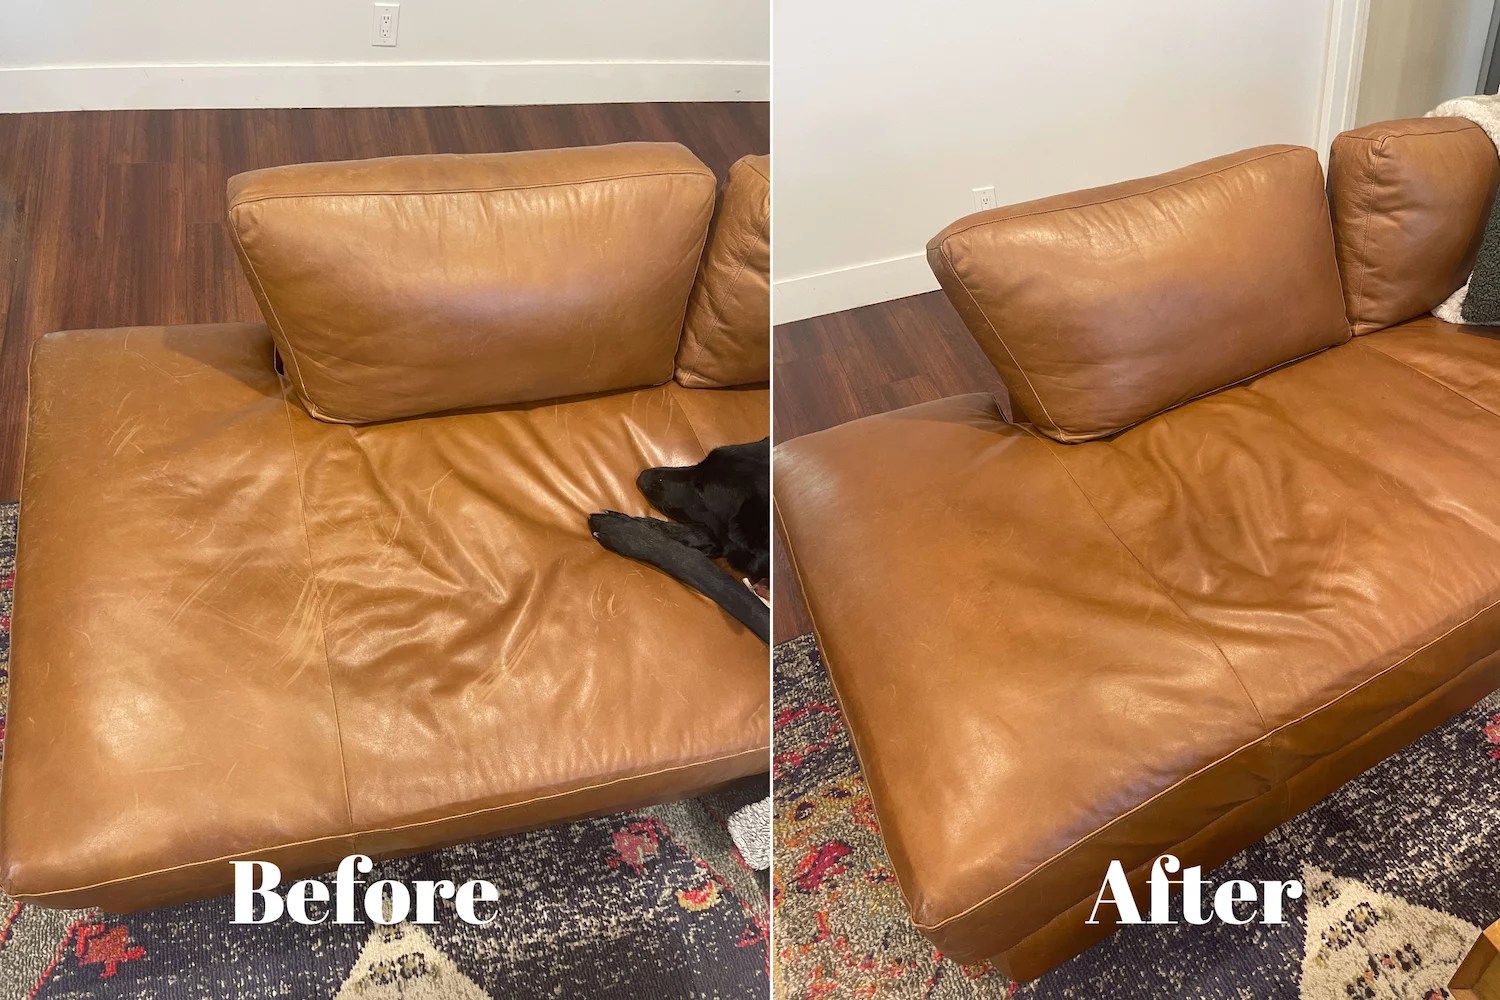 Leather Stain - Uses and Options For Coloring Leather